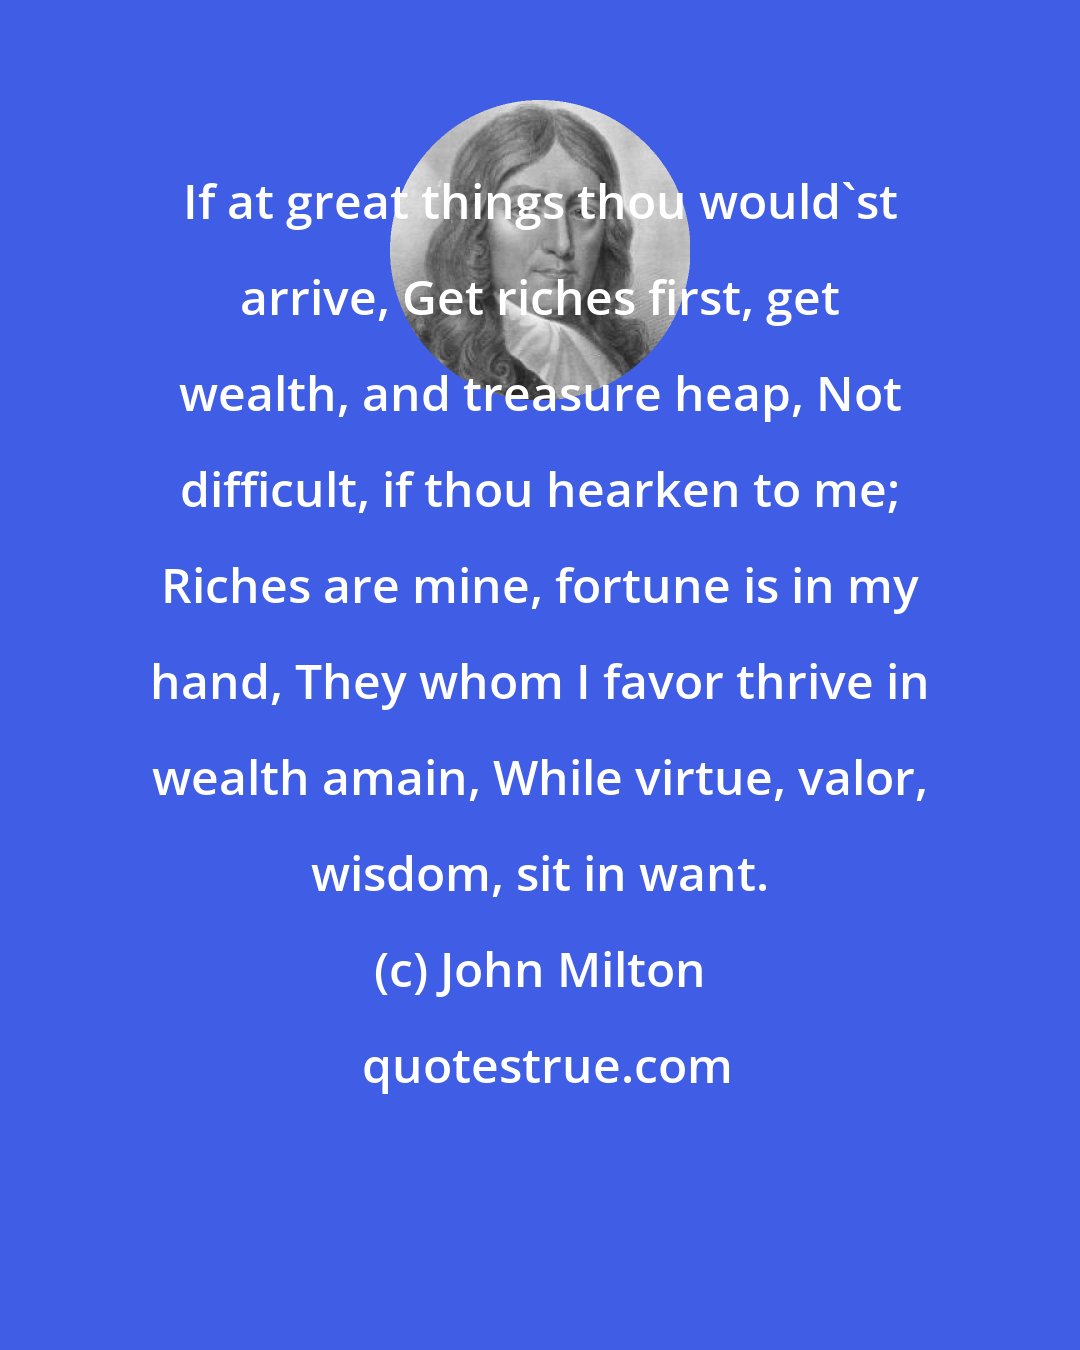 John Milton: If at great things thou would'st arrive, Get riches first, get wealth, and treasure heap, Not difficult, if thou hearken to me; Riches are mine, fortune is in my hand, They whom I favor thrive in wealth amain, While virtue, valor, wisdom, sit in want.